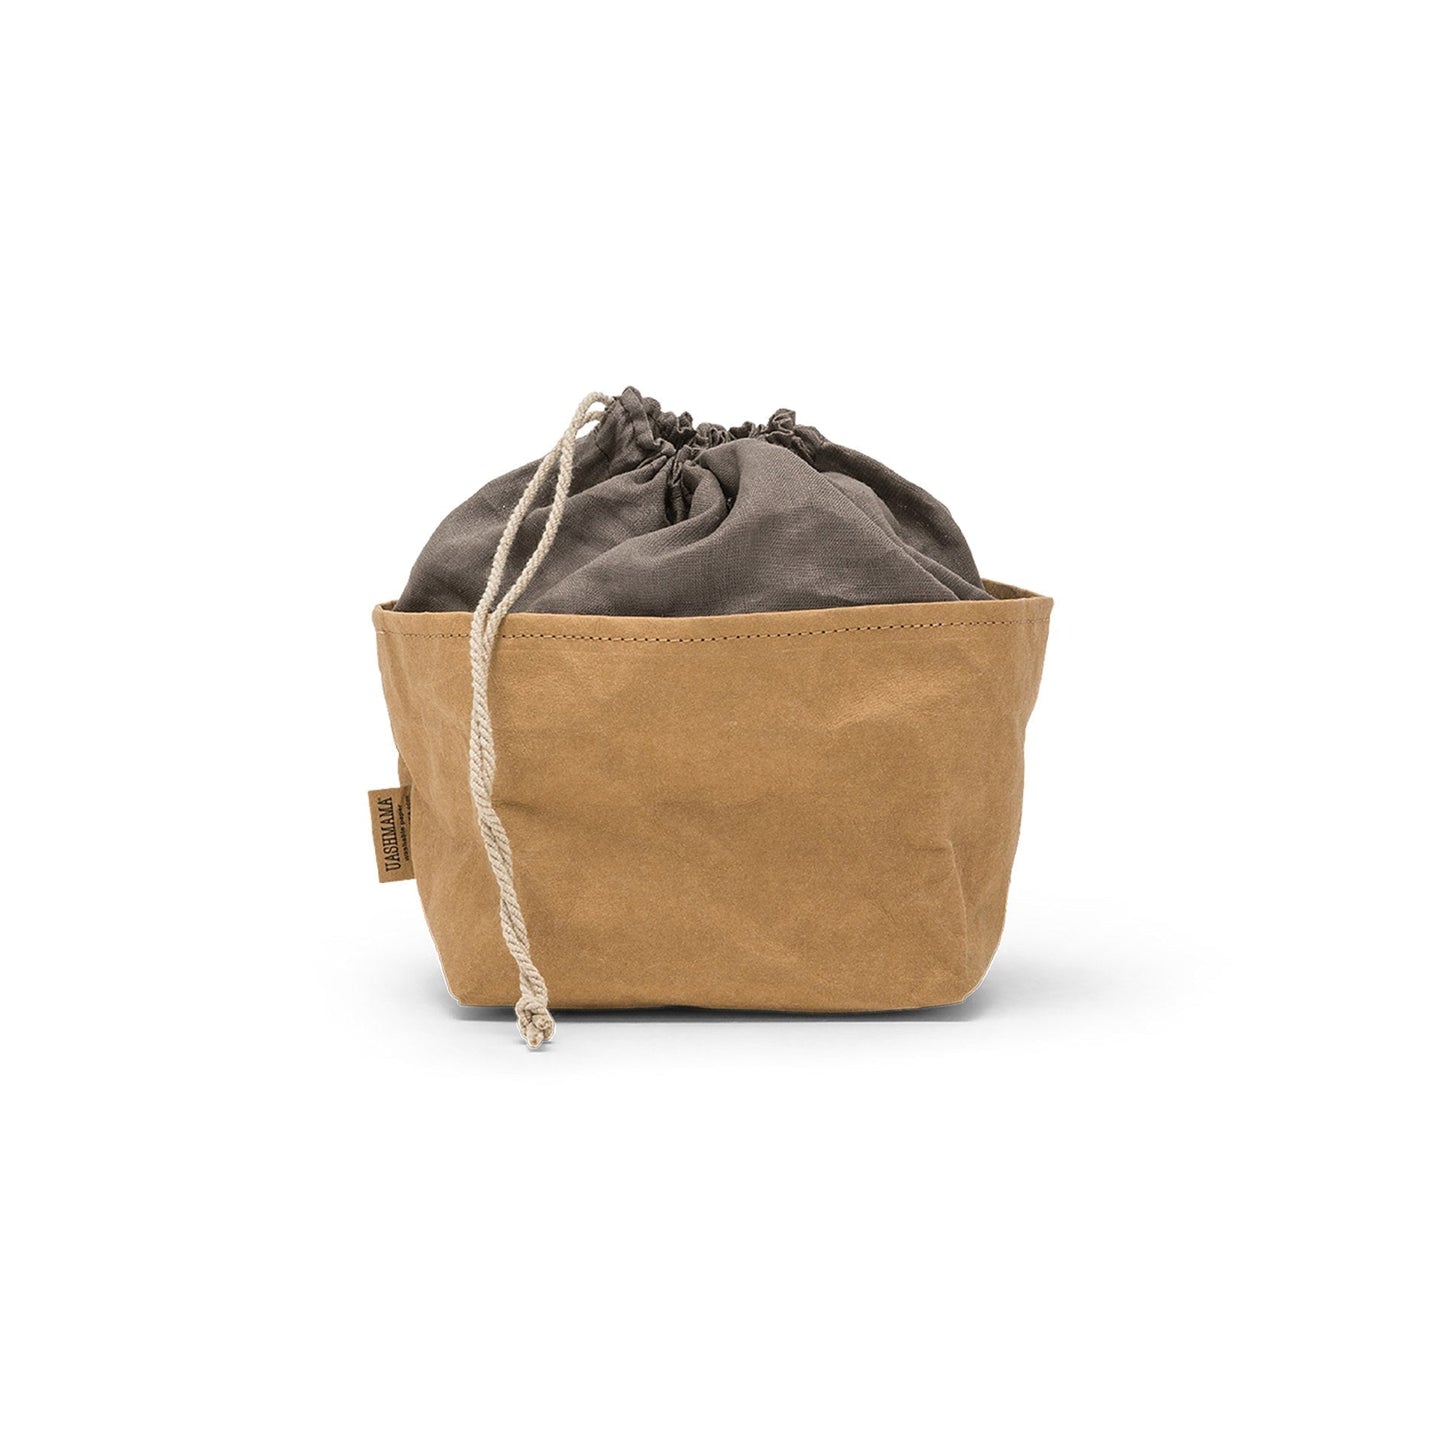 A washable paper bread bag with a drawstring organic linen top is shown. The bag has a small UASHMAMA logo label on the left hand side and fastens with a beige cord drawstring. The bag is tan in colour with a dark grey linen drawstring top.